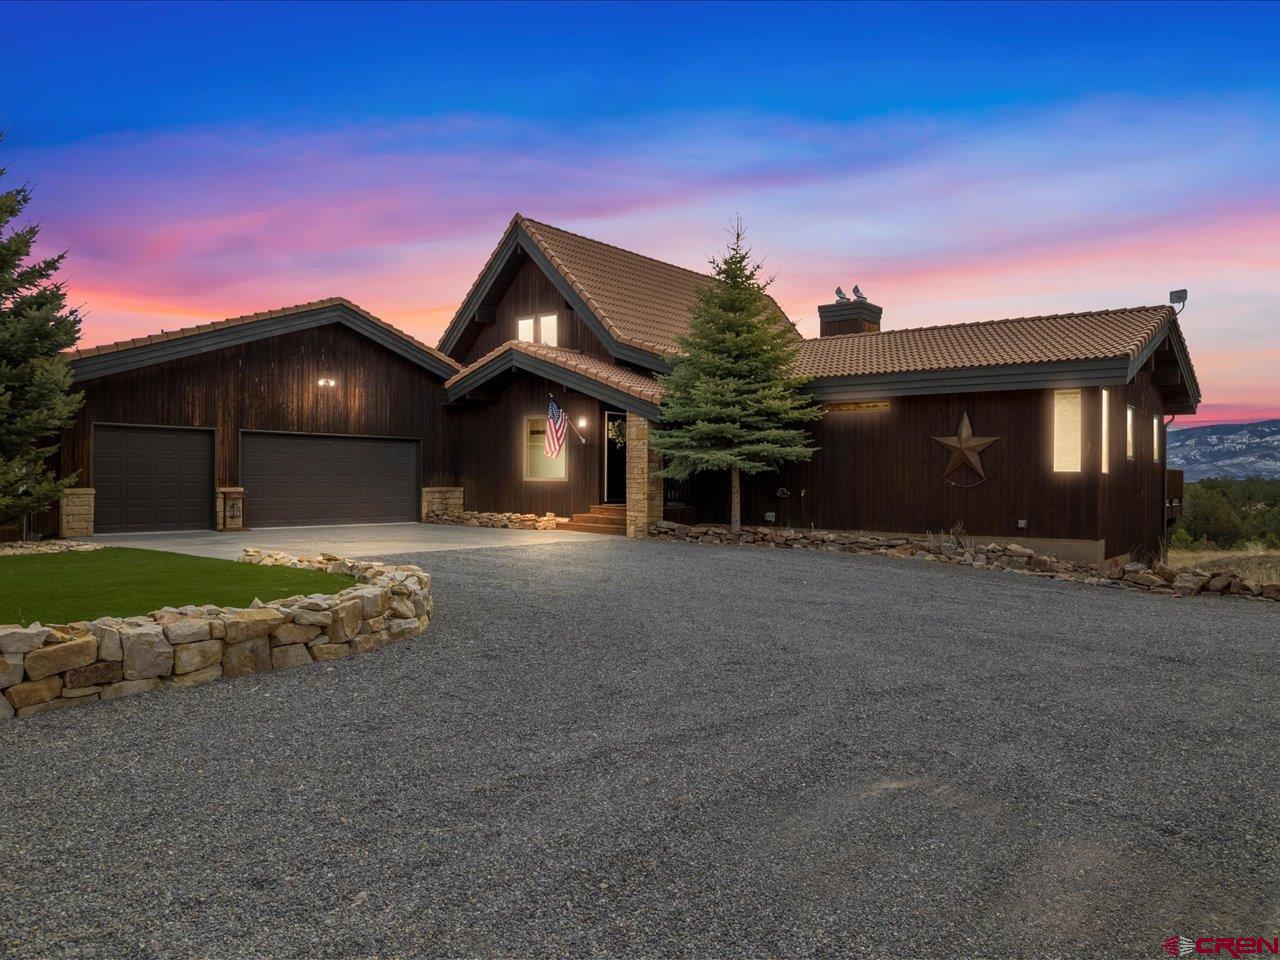 Welcome to your dream home in Ridgway, Colorado! This custom-built beauty boasts breathtaking views that simply cannot be replicated. With over $200k invested in new windows, every corner of this home is designed to showcase the stunning landscape of the San Juan and Cimarron Mountain Ranges.  Nestled on a spacious 9.6+ acre parcel, this property offers ample room for horses and endless opportunities for outdoor adventures. With snow on the ground, strap on your cross-country skiis right from your front door.  Discover the joy of observing wildlife footprints right from your own deck, as they wander through this extraordinary landscape. Imagine relaxing in the serenity of your private oasis while enjoying uninterrupted views of Nature's creation.  Inside, the main floor living area is thoughtfully designed for comfort and convenience. The gourmet kitchen, dining area, and living room feature an open-concept layout, accentuated by 20' windows that flood the space with natural light. Quartz countertops, tile floors, and high-end appliances including a Jenn-Aire gas range/oven add a touch of luxury to the heart of the home.  The main level also hosts a spacious en-suite master bedroom with a cozy fireplace and sliding glass doors leading to the deck. The master bathroom boasts quartz countertops, double sinks, open air double sided shower oasis, and a walk-in closet with a dressing area. Additionally, a guest room, full bath, and laundry room complete the main level.  Entertainment awaits in the 3-car attached garage, which includes a game room for endless fun. The lower level features three bedrooms, a bunk room, and a large family room with a wet bar and wine fridge. Whether hosting family gatherings or enjoying quiet evenings by the fire pit, this home offers ample space for all your needs.  With a total of 5 bedrooms and 4 baths, plus a versatile loft space that can be used as an office, library, or playroom, there's room for everyone to spread out and relax. Enjoy the benefits of pure, soft water in this home, complete with a full-home water softener system. Additionally, the kitchen boasts a brand-new reverse osmosis system, ensuring clean and purified drinking water for you and your family. Don't miss out on the chance to make this your forever home – schedule a showing today and experience the extraordinary lifestyle awaiting you in Ridgway, CO!